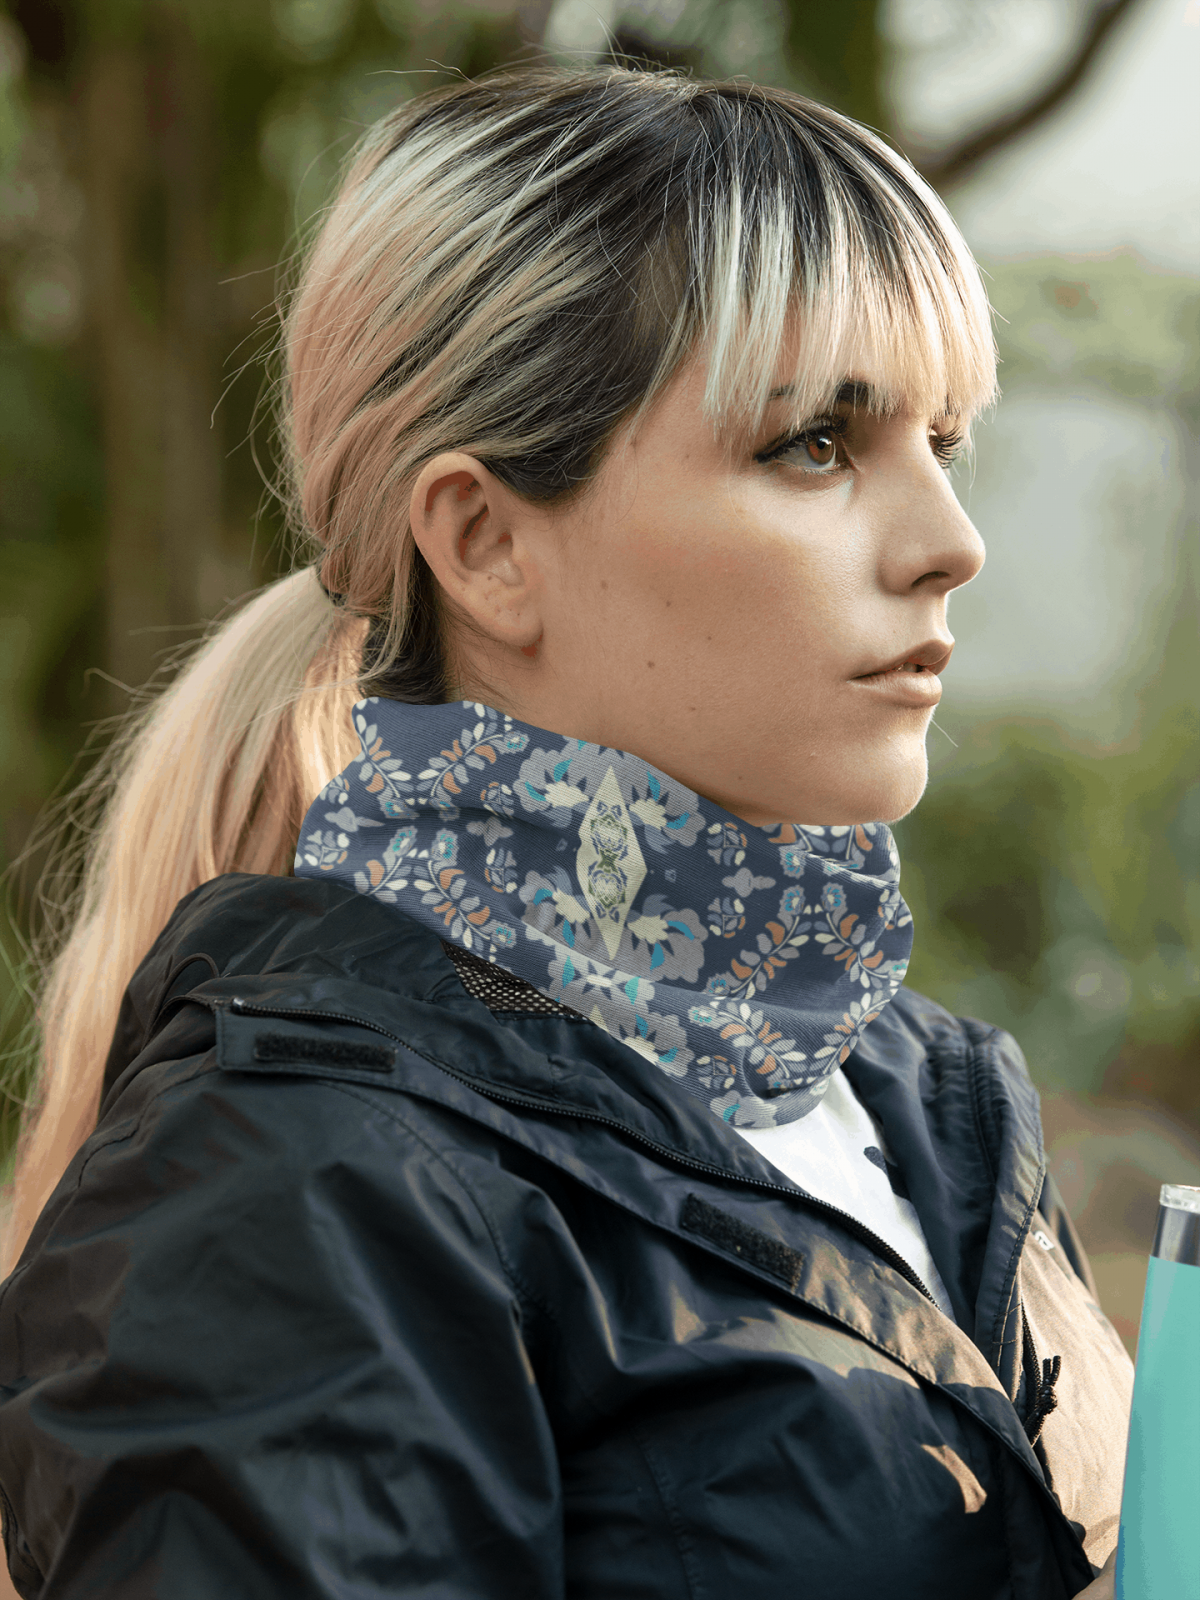 mockup of a young woman wearing a neck gaiter on the street 36141 4